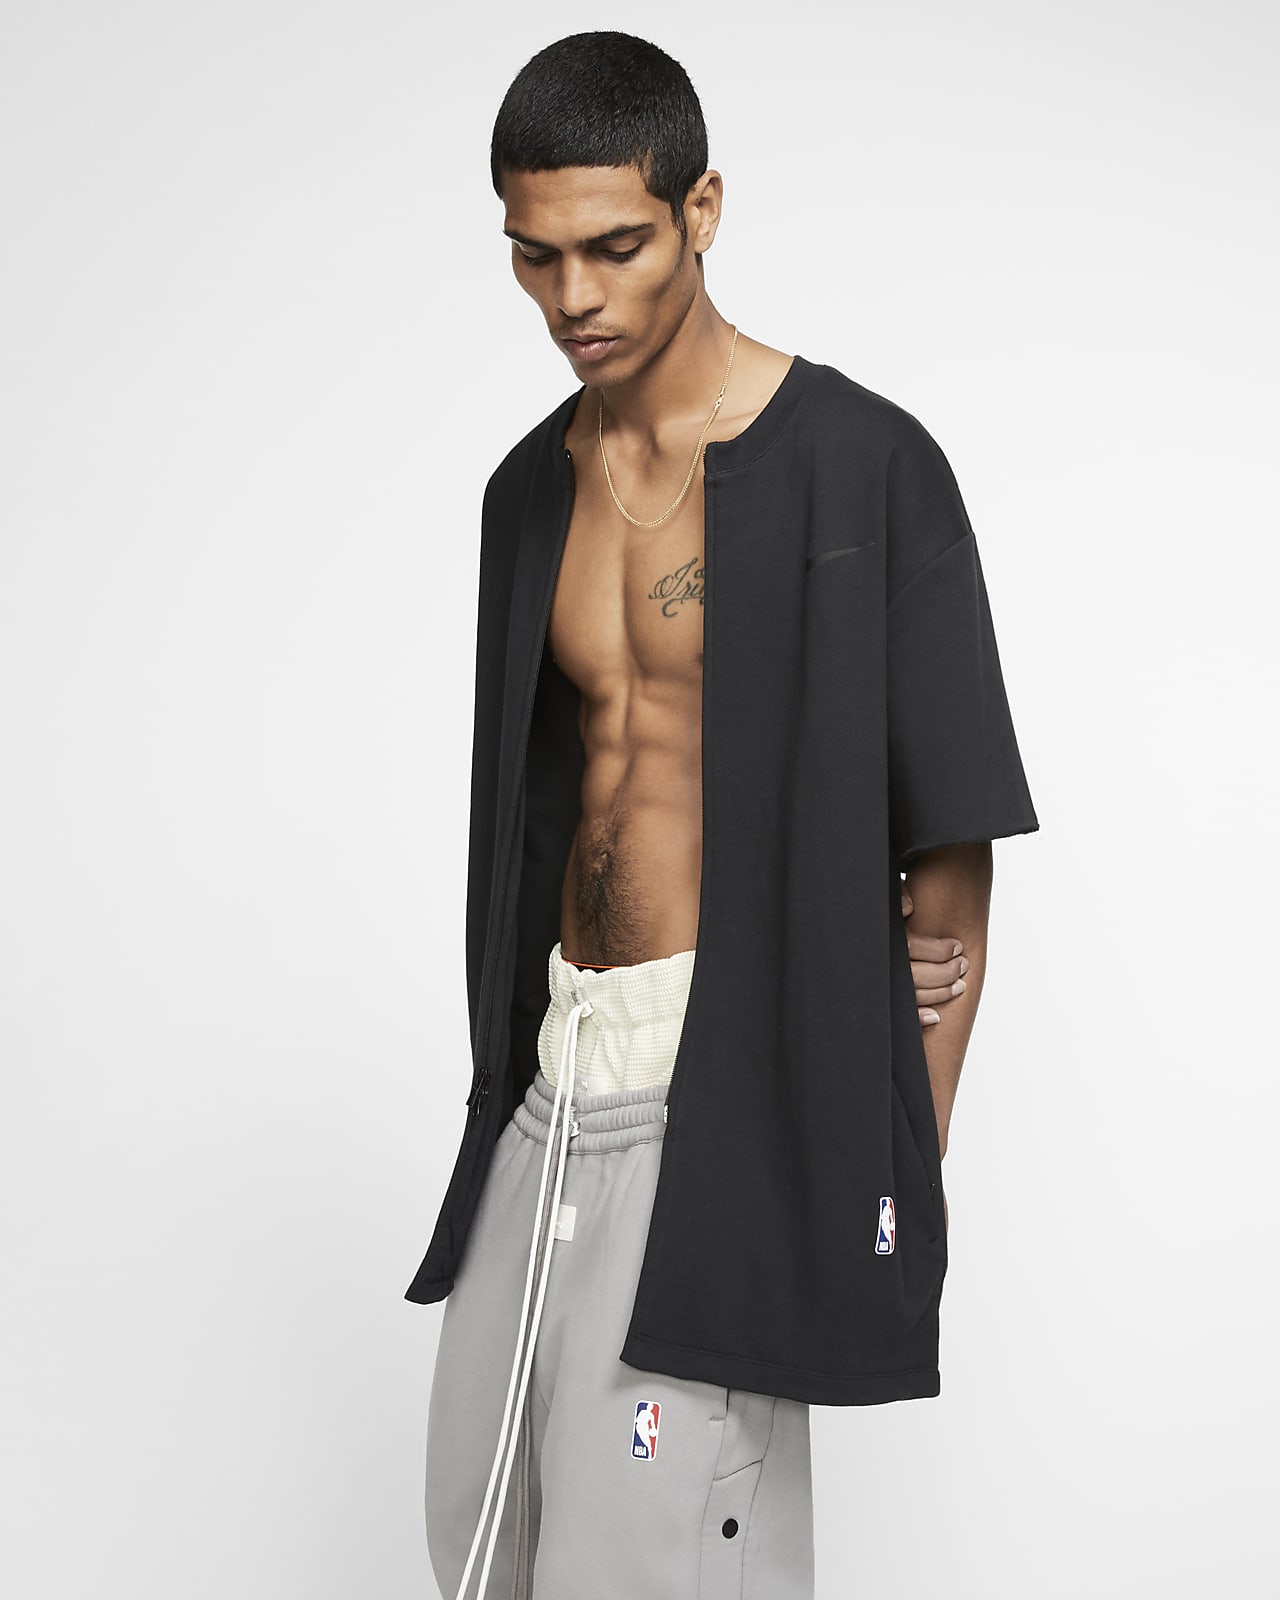 S Nike Fear of GOD Warm Up Top Black